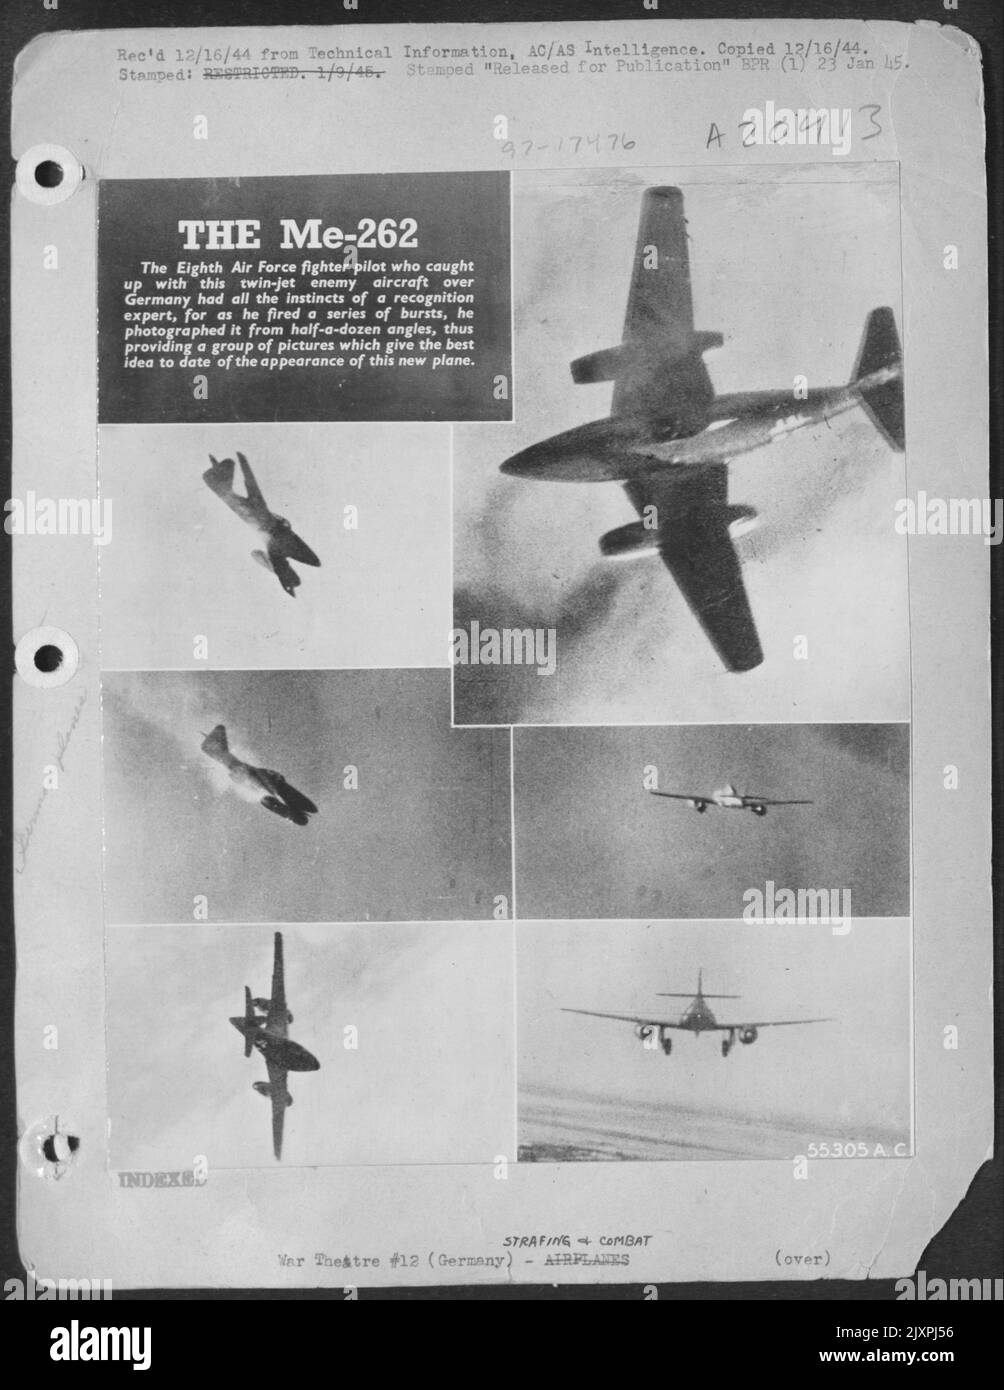 The 8th Air Force fighter pilot who caught up with this twin-jet enemy aircraft over Germany had all the instincts of a recognition expert, for as he fired a series of bursts, he photographed it from half-a-dozen angles, thus providing a group of Stock Photo